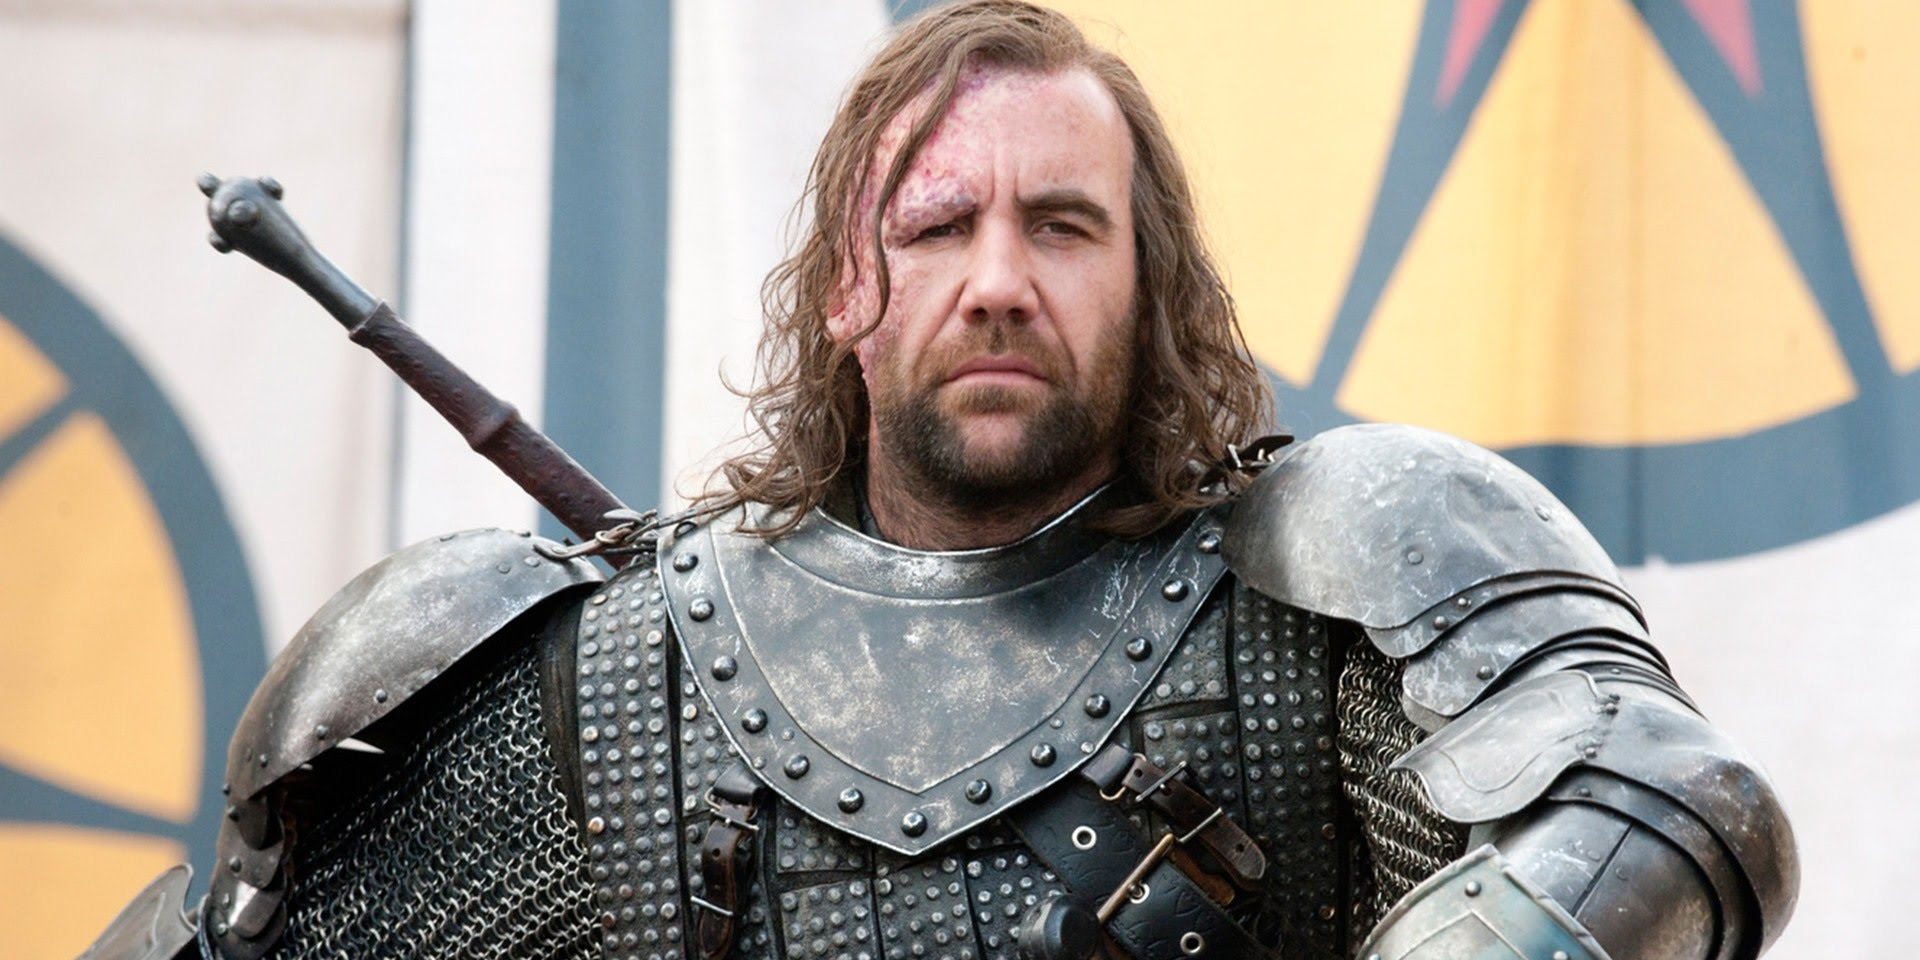 Sandor Clegane (Rory McCann) watches a tourney with an inscrutable expression in Game of Thrones